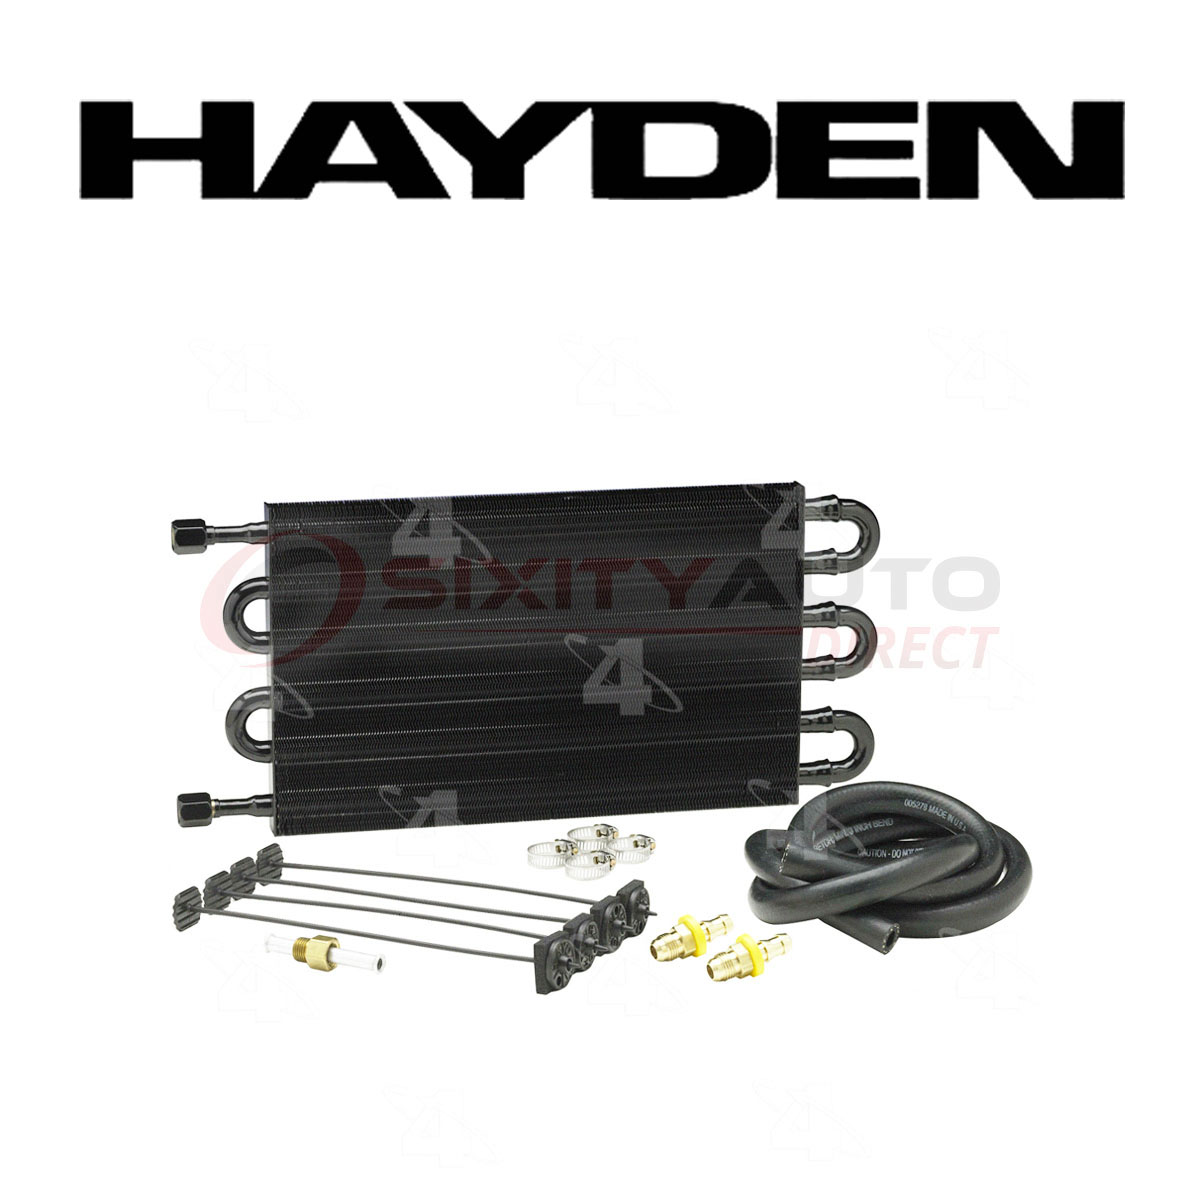 Hayden Transmission Oil Cooler for 2002-2014 Chrysler Town & Country 3.3L pv | eBay 2014 Chrysler Town And Country Oil Cooler